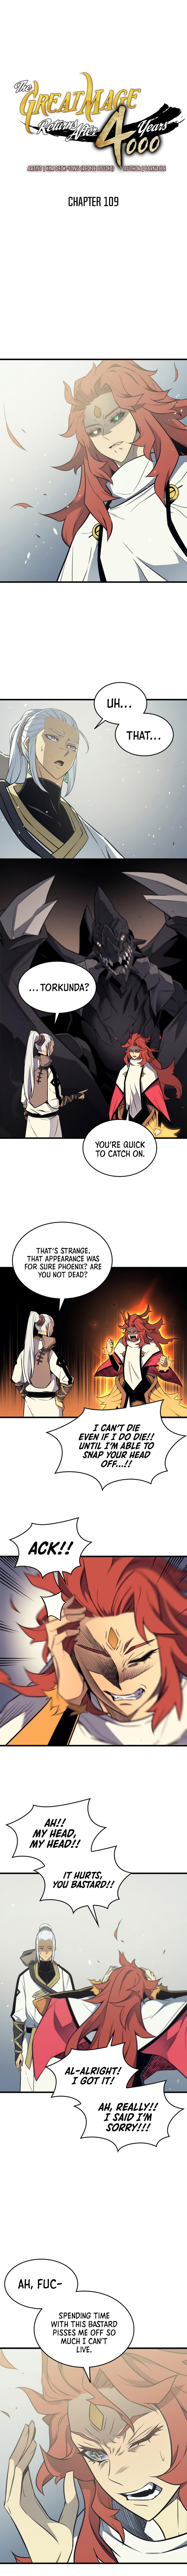 The Great Mage Returns After 4000 Years - Chapter 109 Page 2